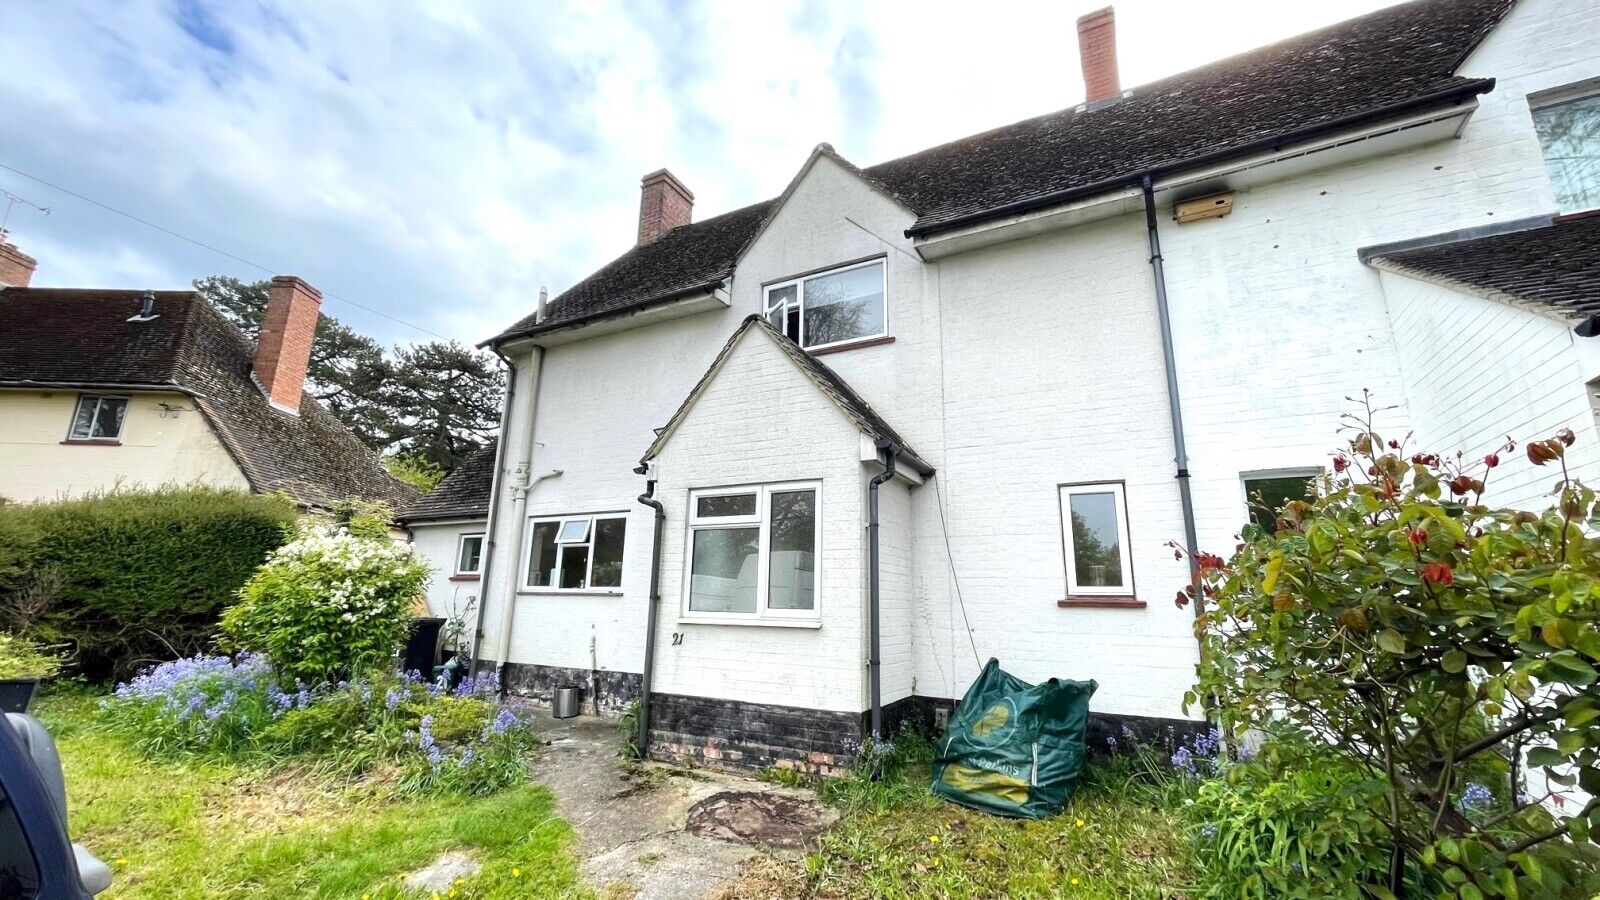 3 bedroom semi detached house for sale The Park, Harwell, OX11, main image